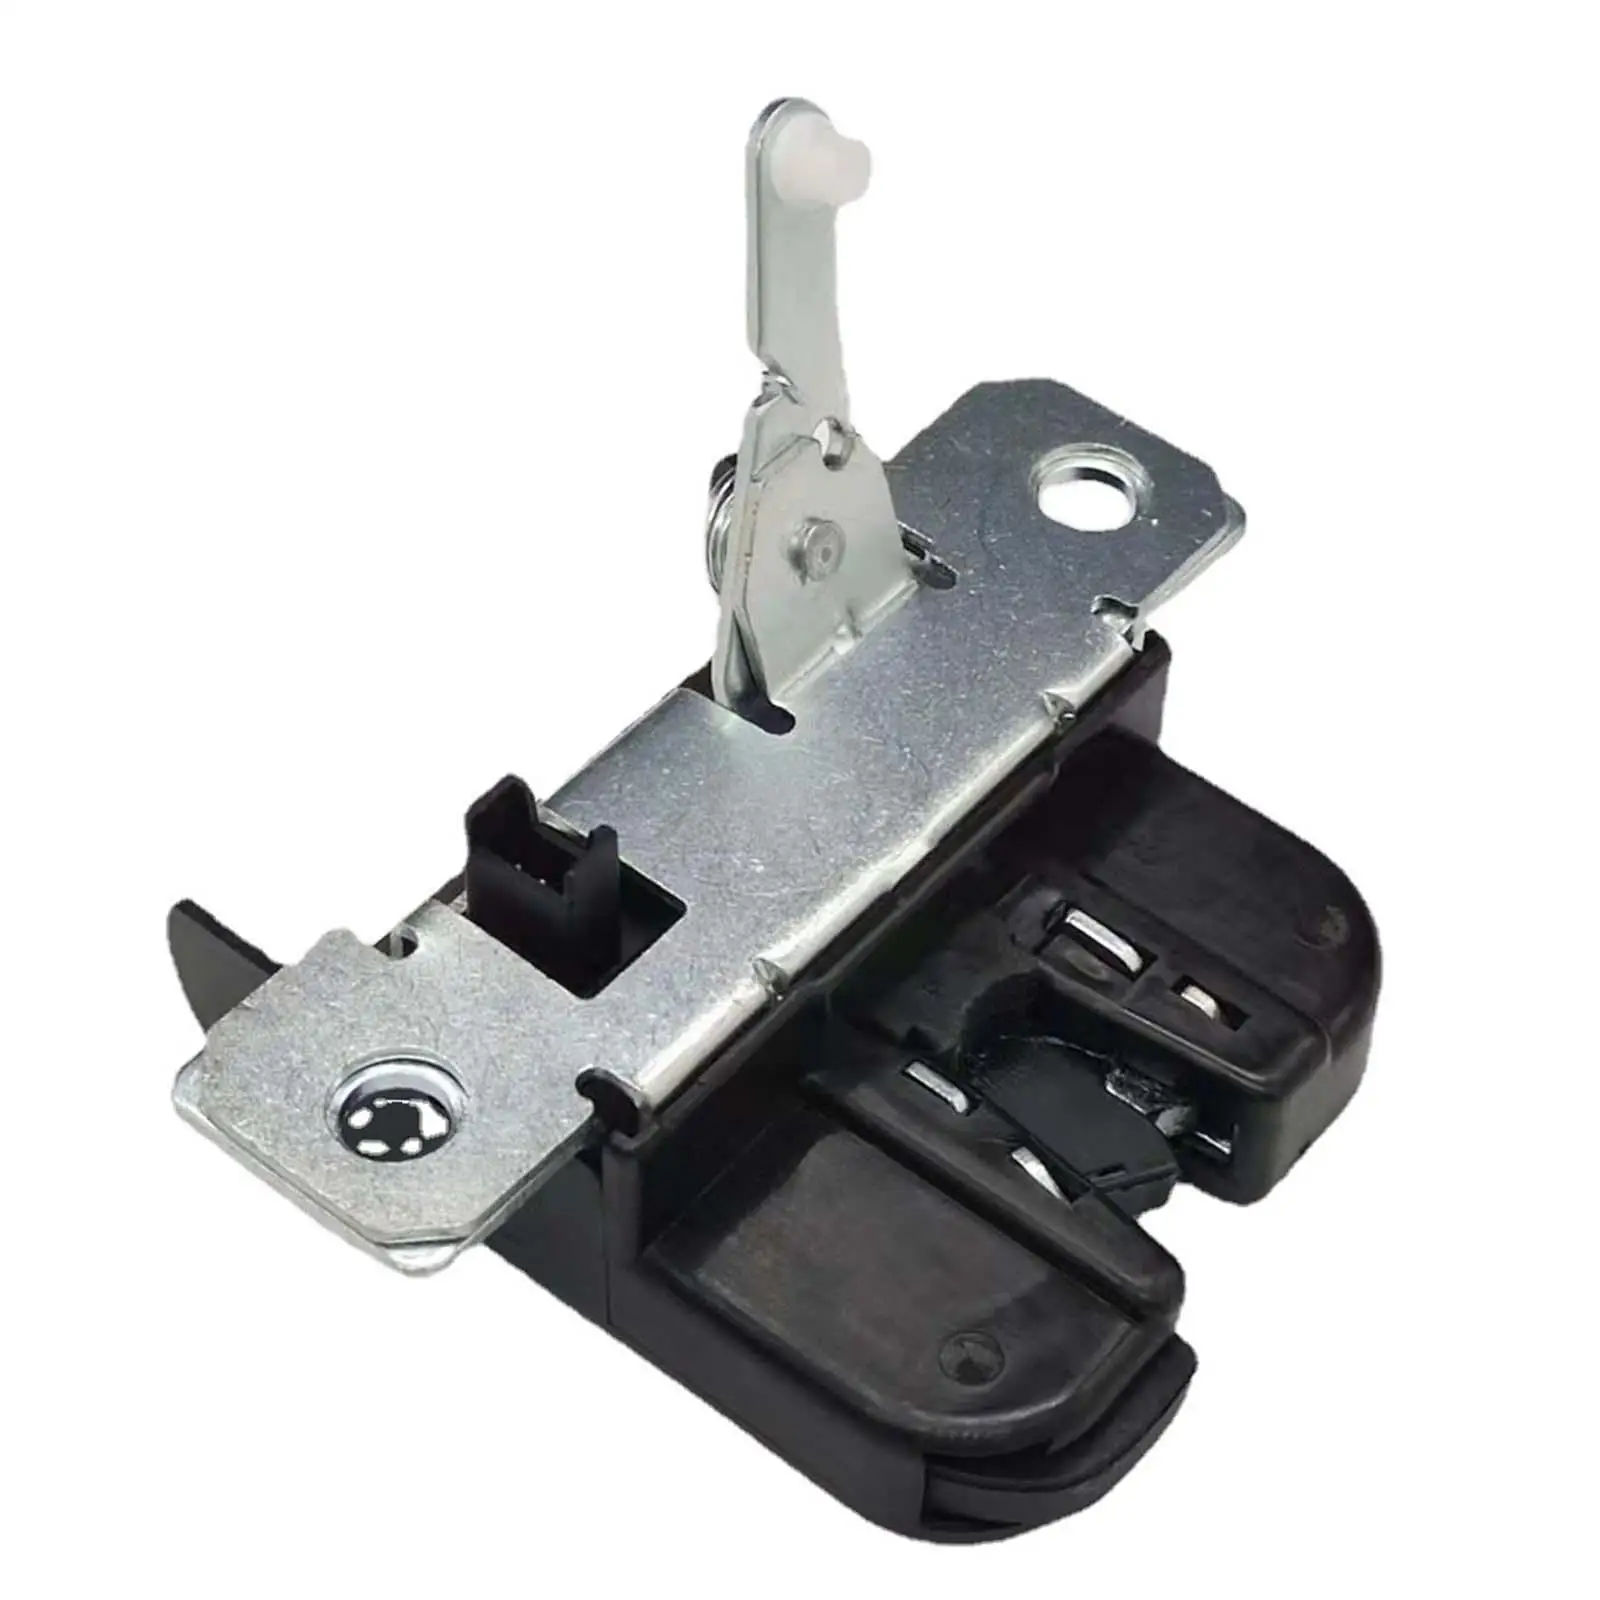 Rear Tailgate Trunk Latch Lock Actuator 1J6827505 Replaces 1J6827505C for VW Polo Vehicle Spare Parts Easily Install Sturdy